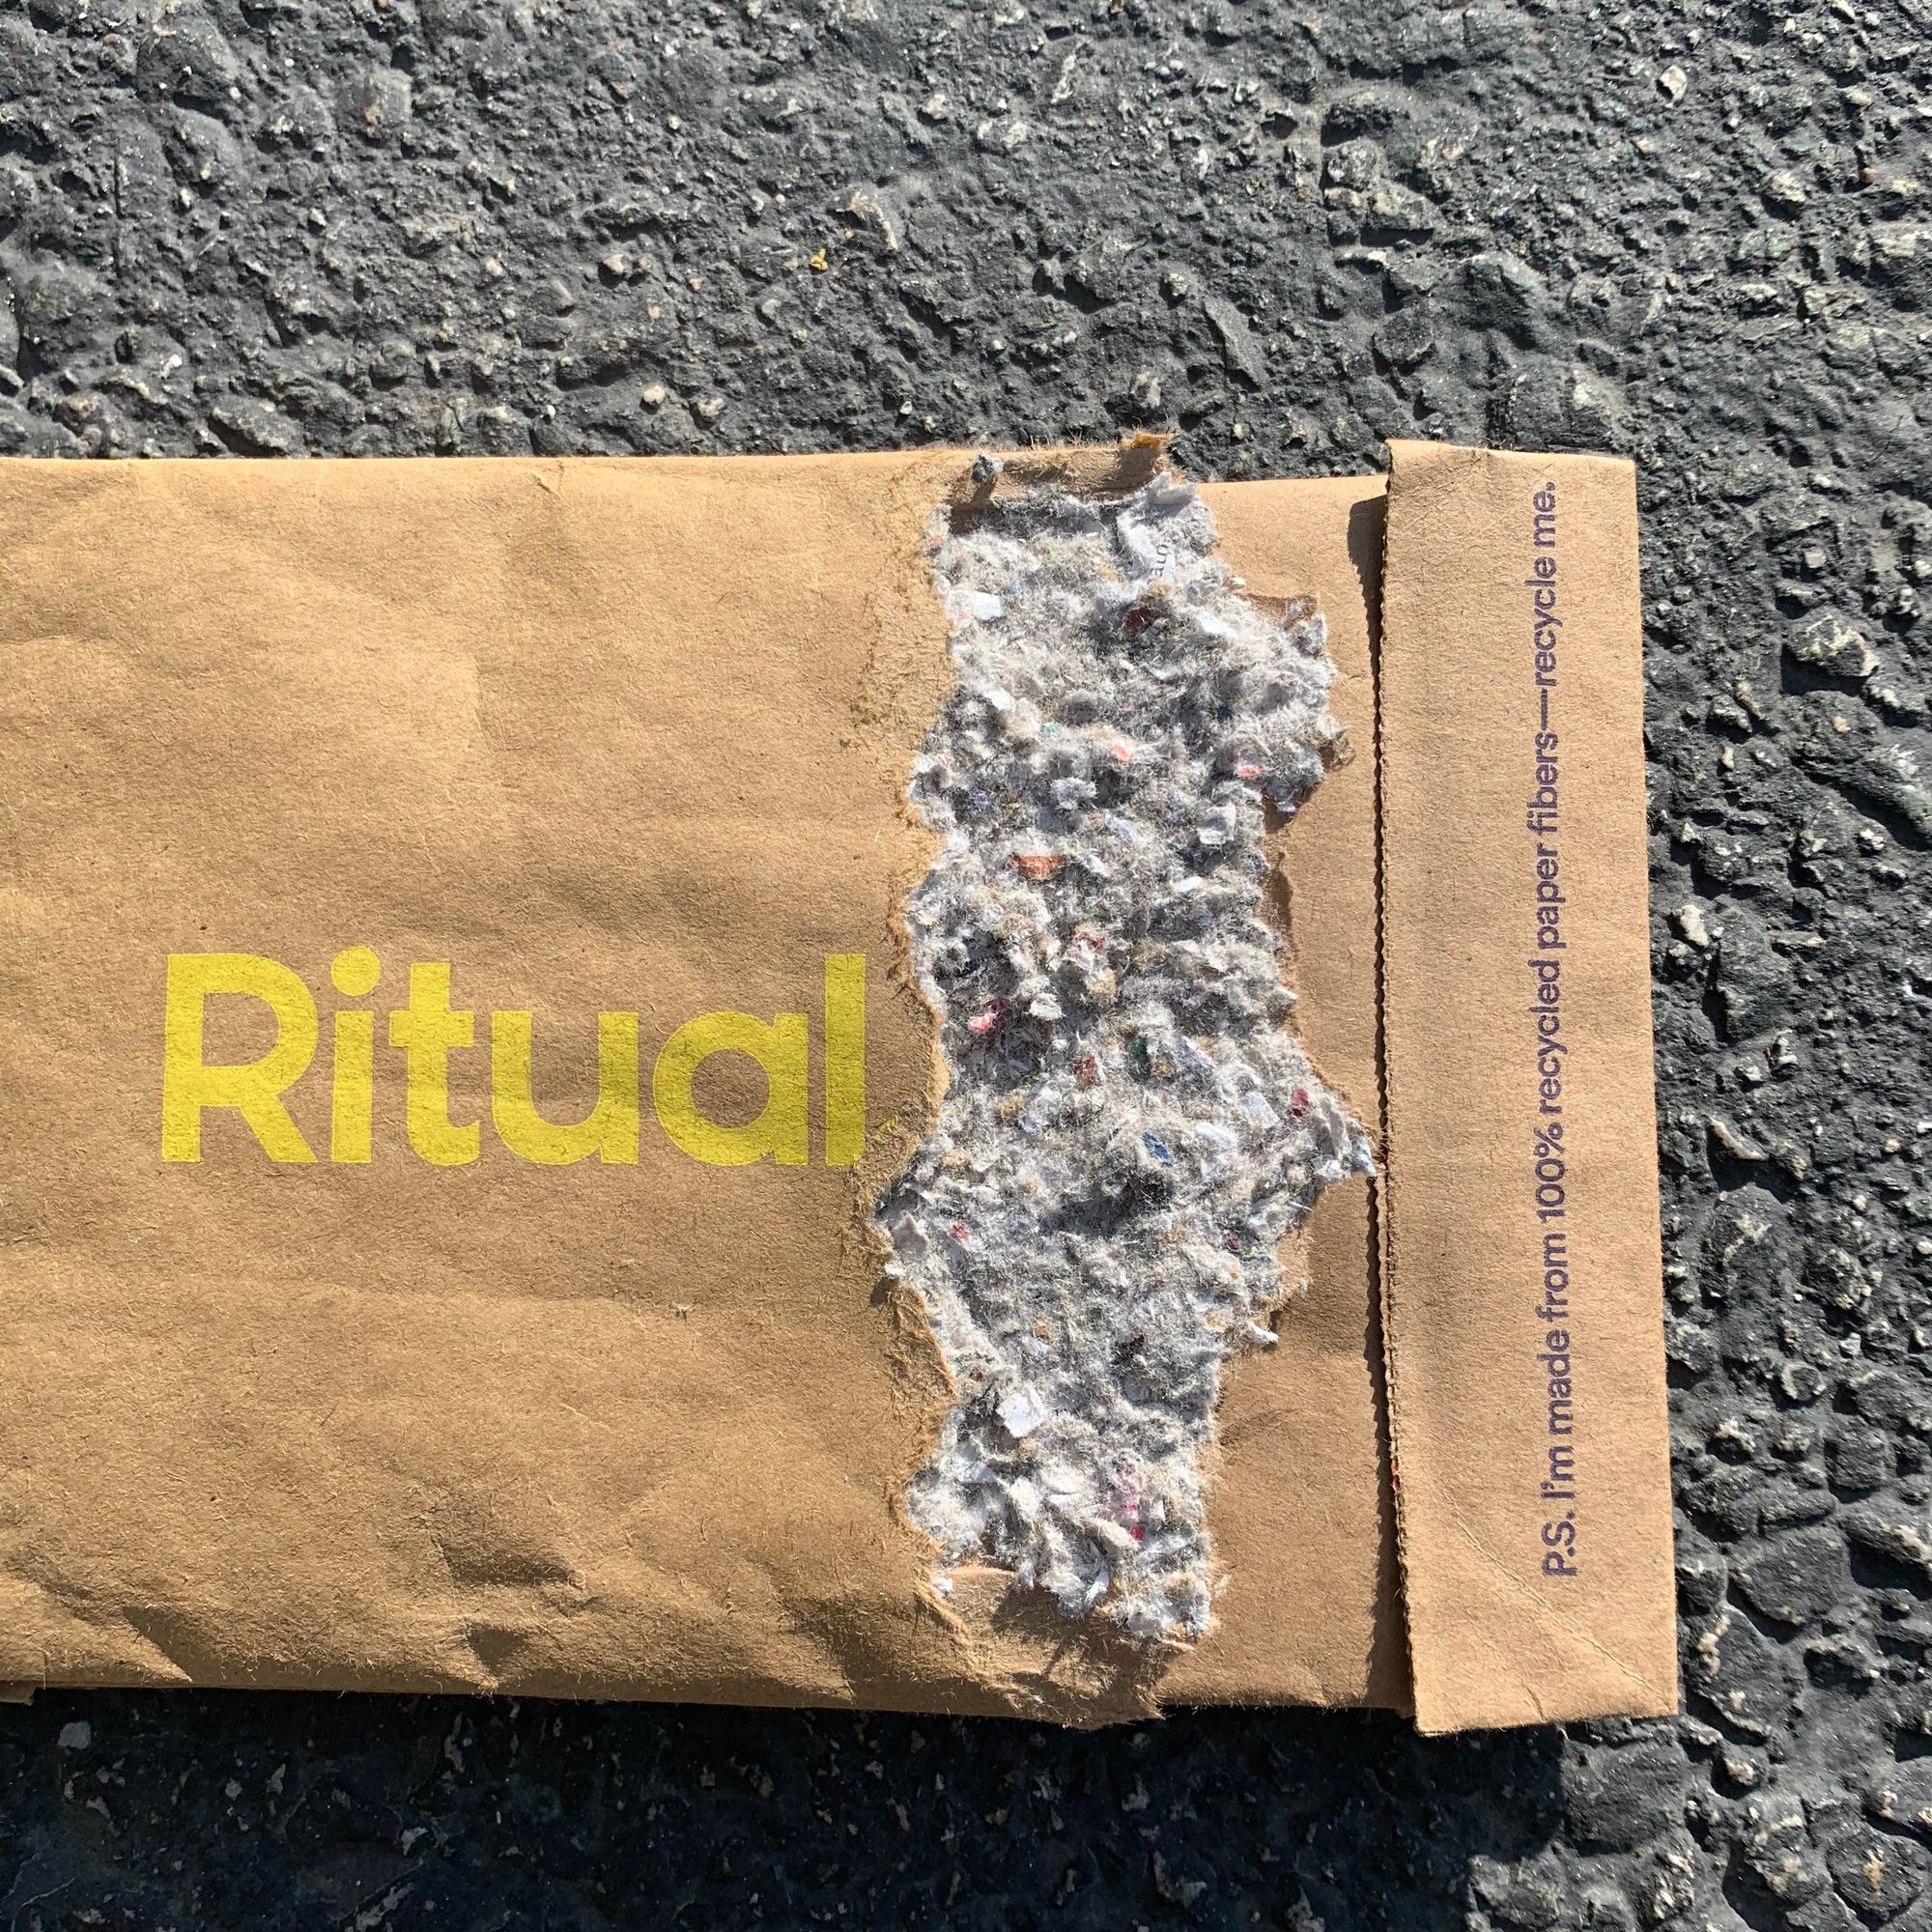 Ritual packaging mailer with a tear that shows recycled paper fibers inside.